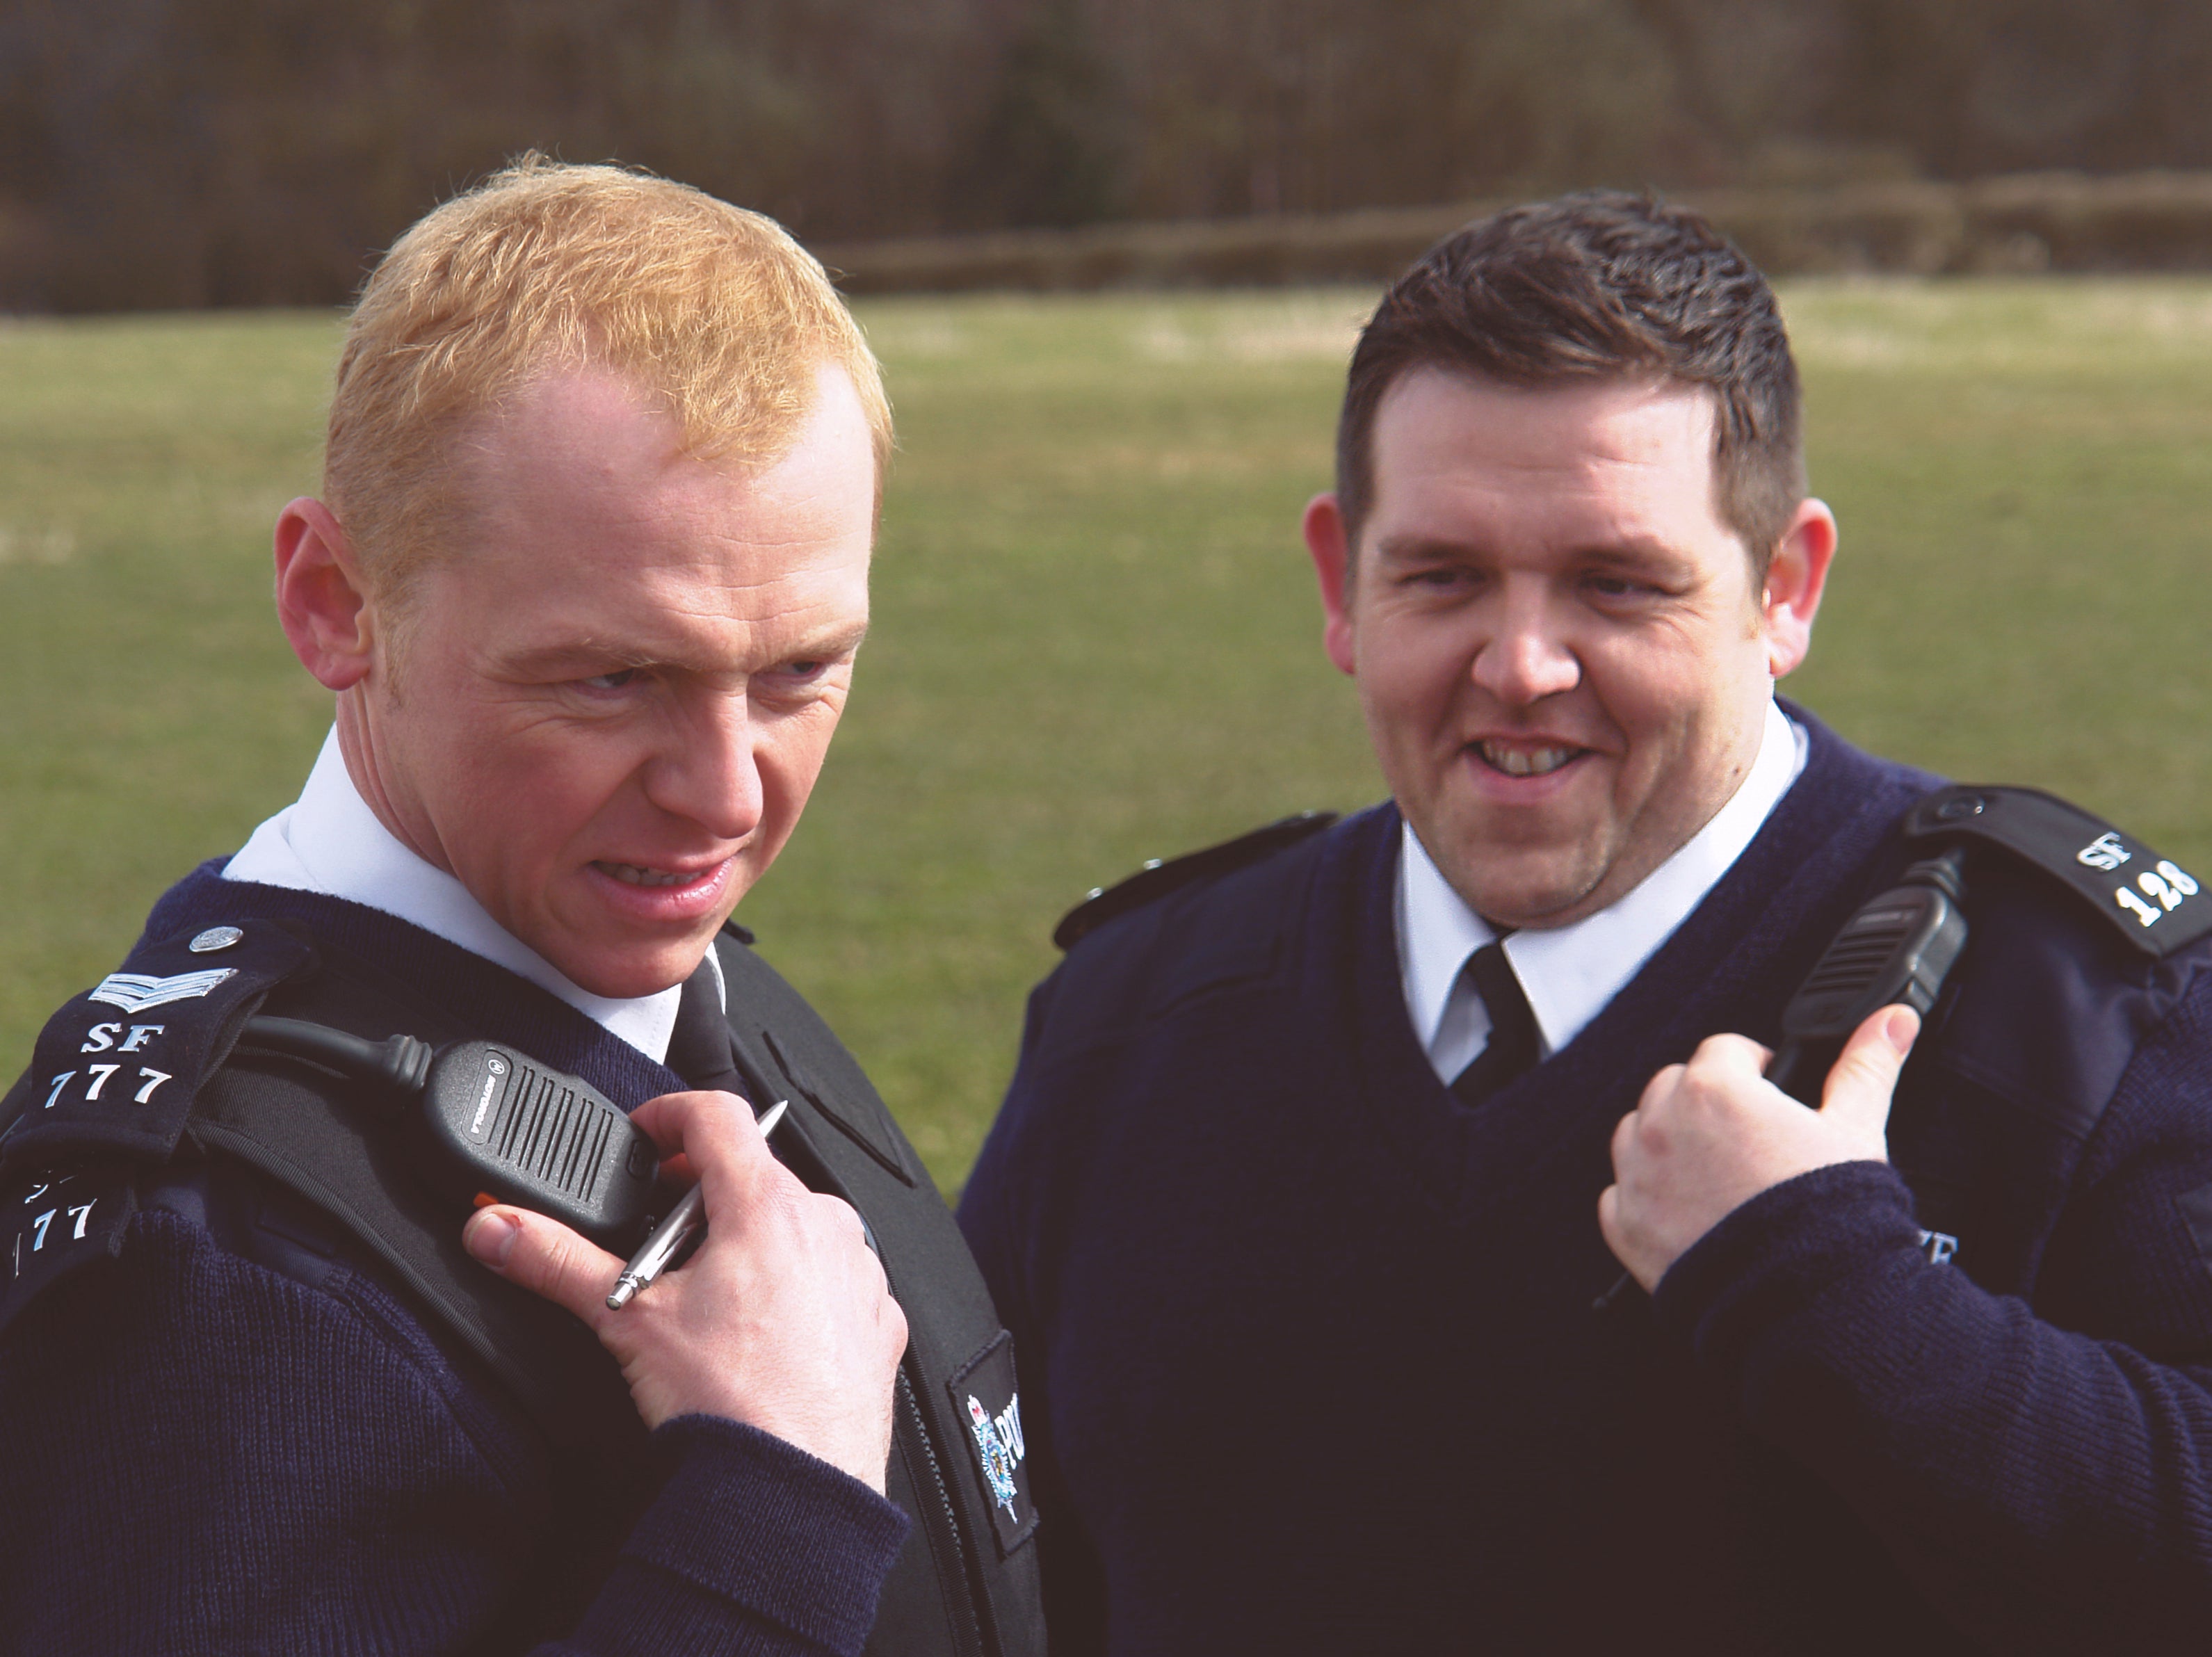 Simon Pegg and Nick Frost in ‘Hot Fuzz' (2007)